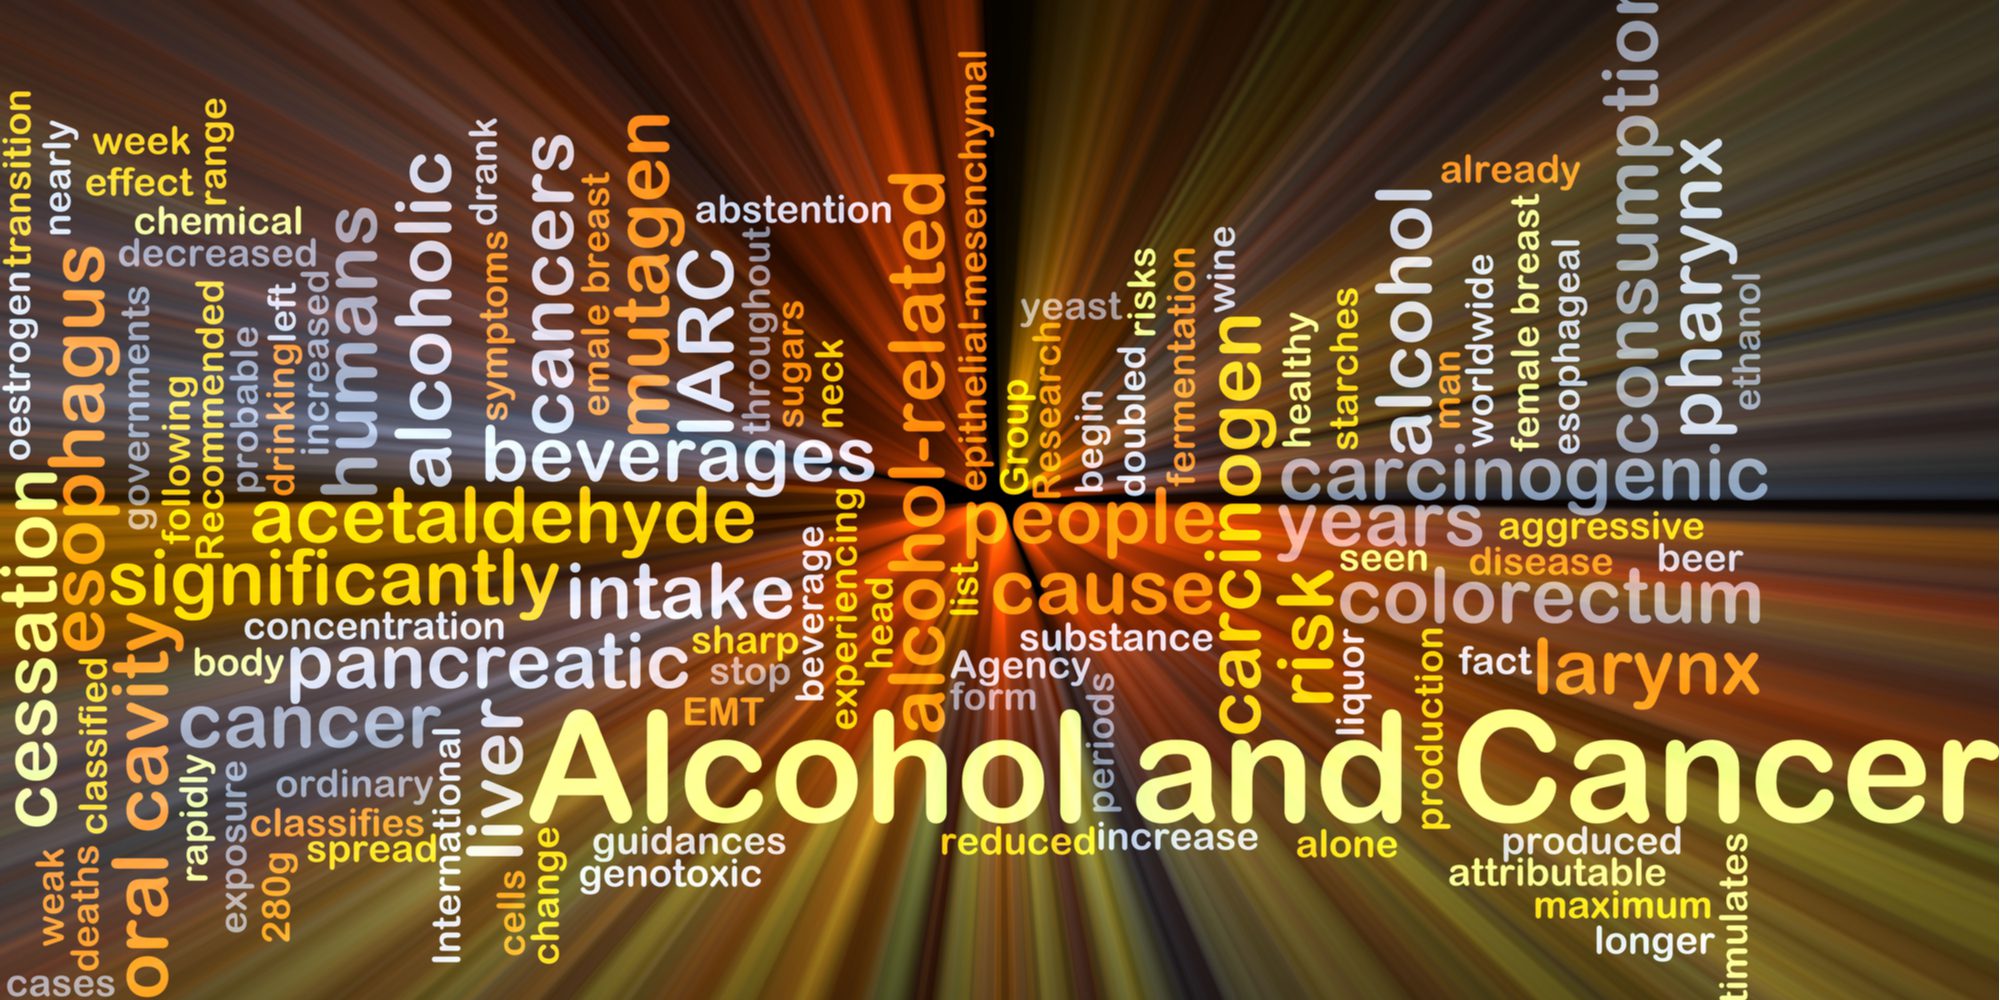 Does Alcohol Cause Cancer? Here’s the Sobering Truth